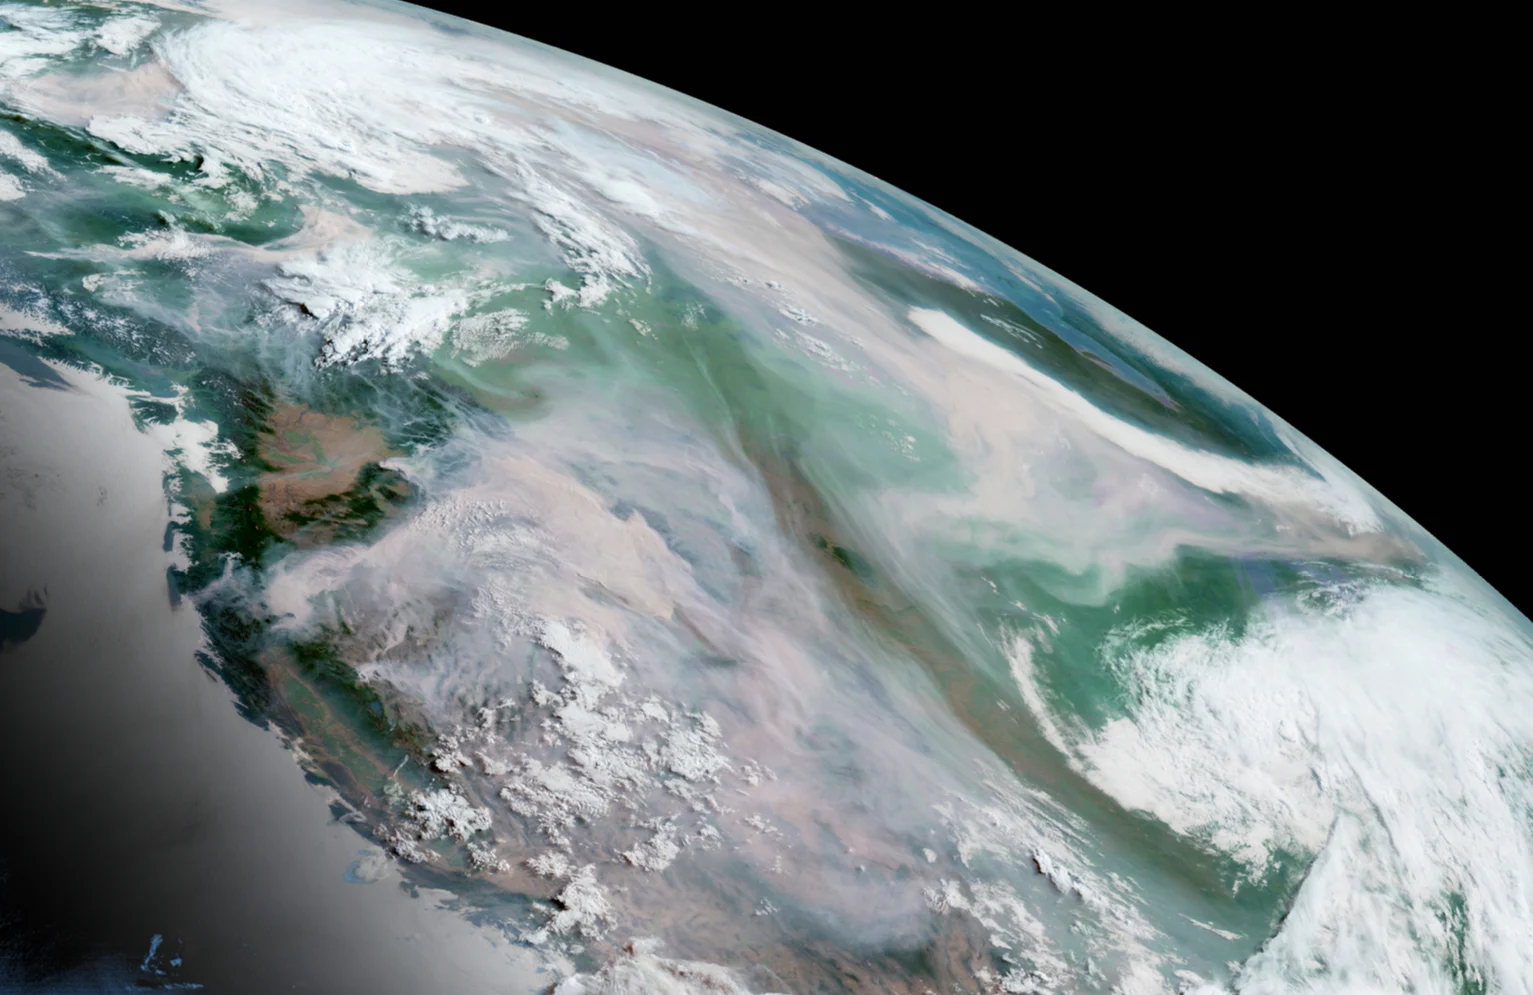 North America chokes in smoke, looks like an ashtray from space